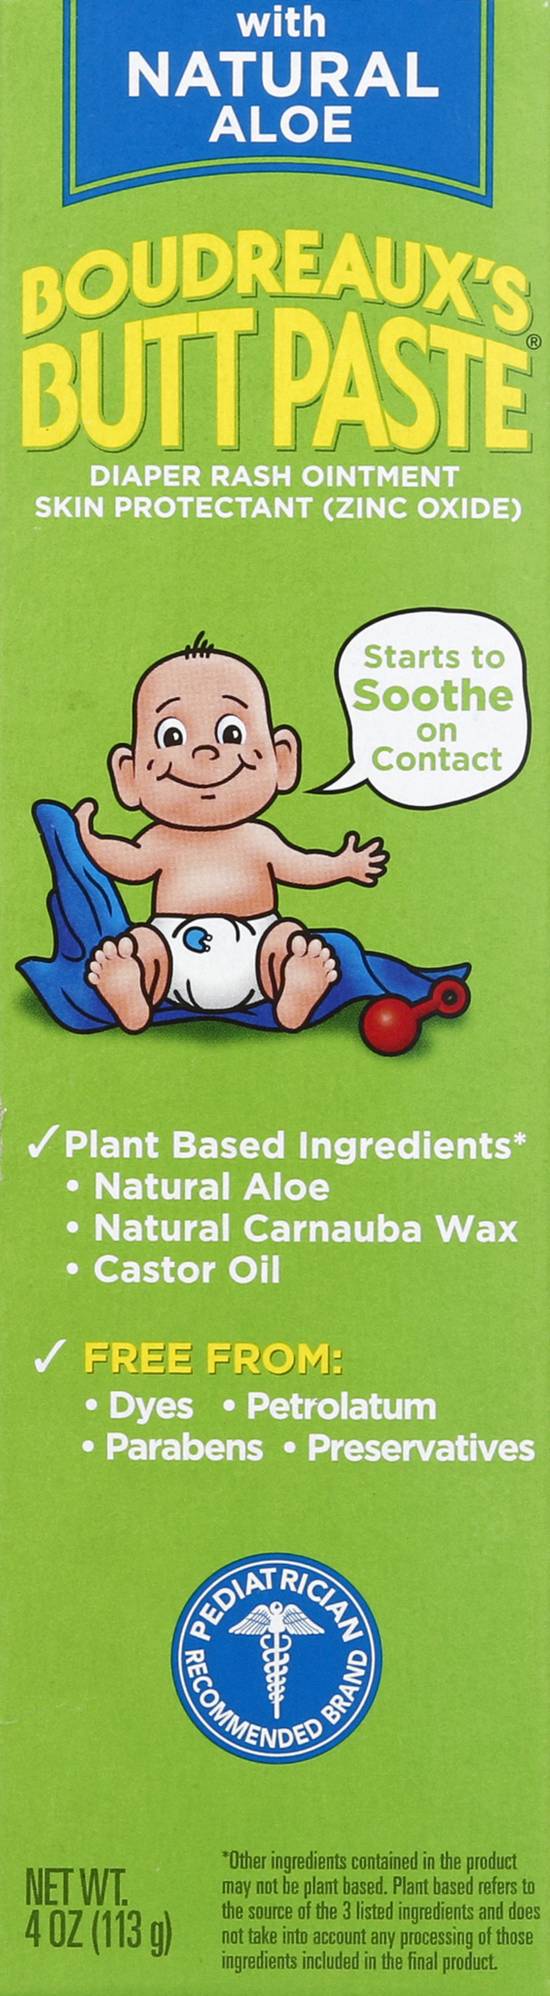 Boudreaux's Diaper Rash Ointment With Natural Aloe